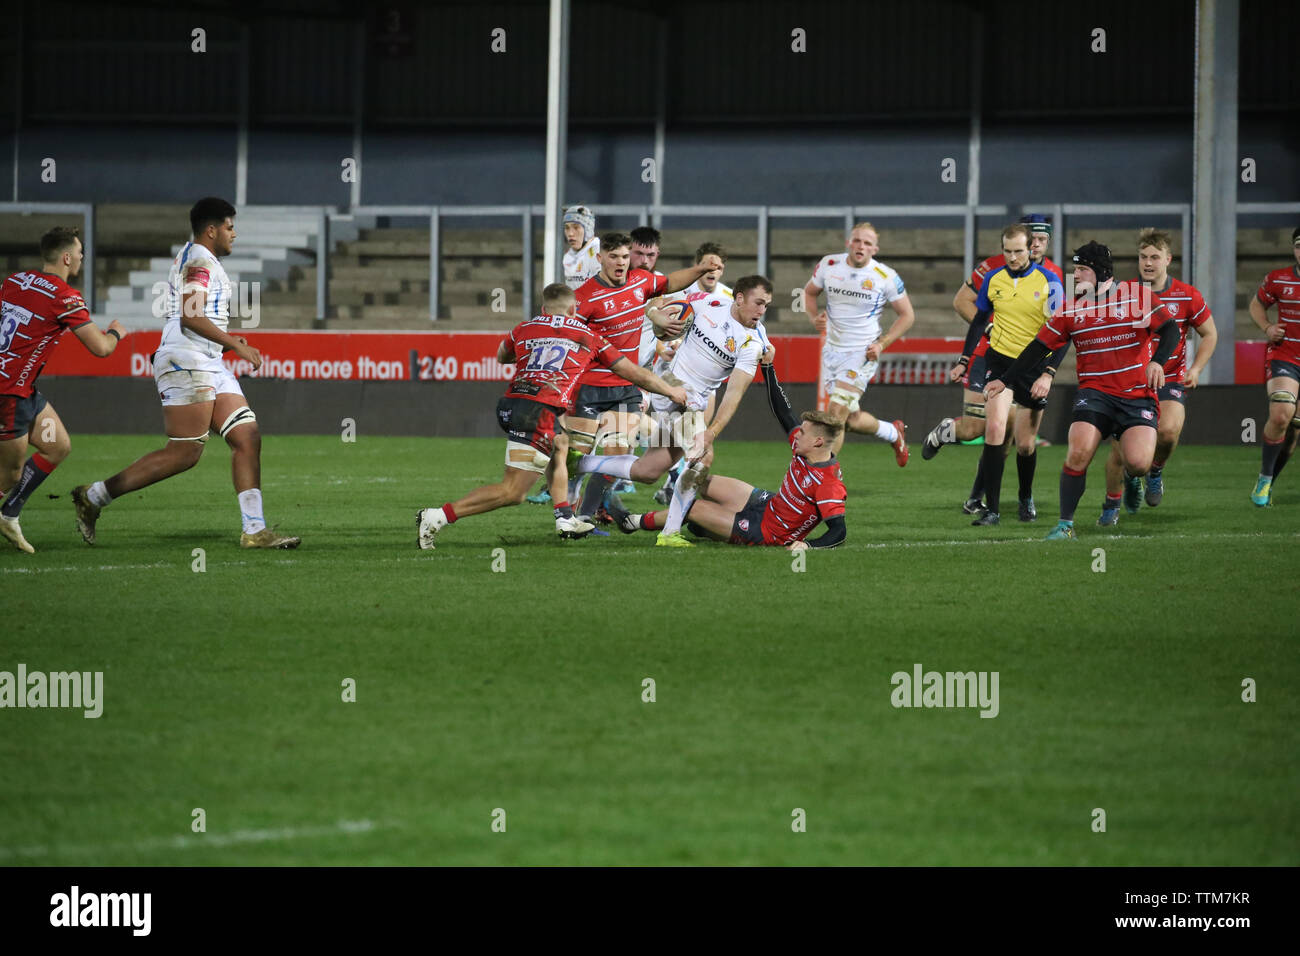 Exeter Chiefs Max Bodilly breaking free from the Gloucester defence heading for the try line at Kingsholm stadium, Gloucester, UK. Stock Photo